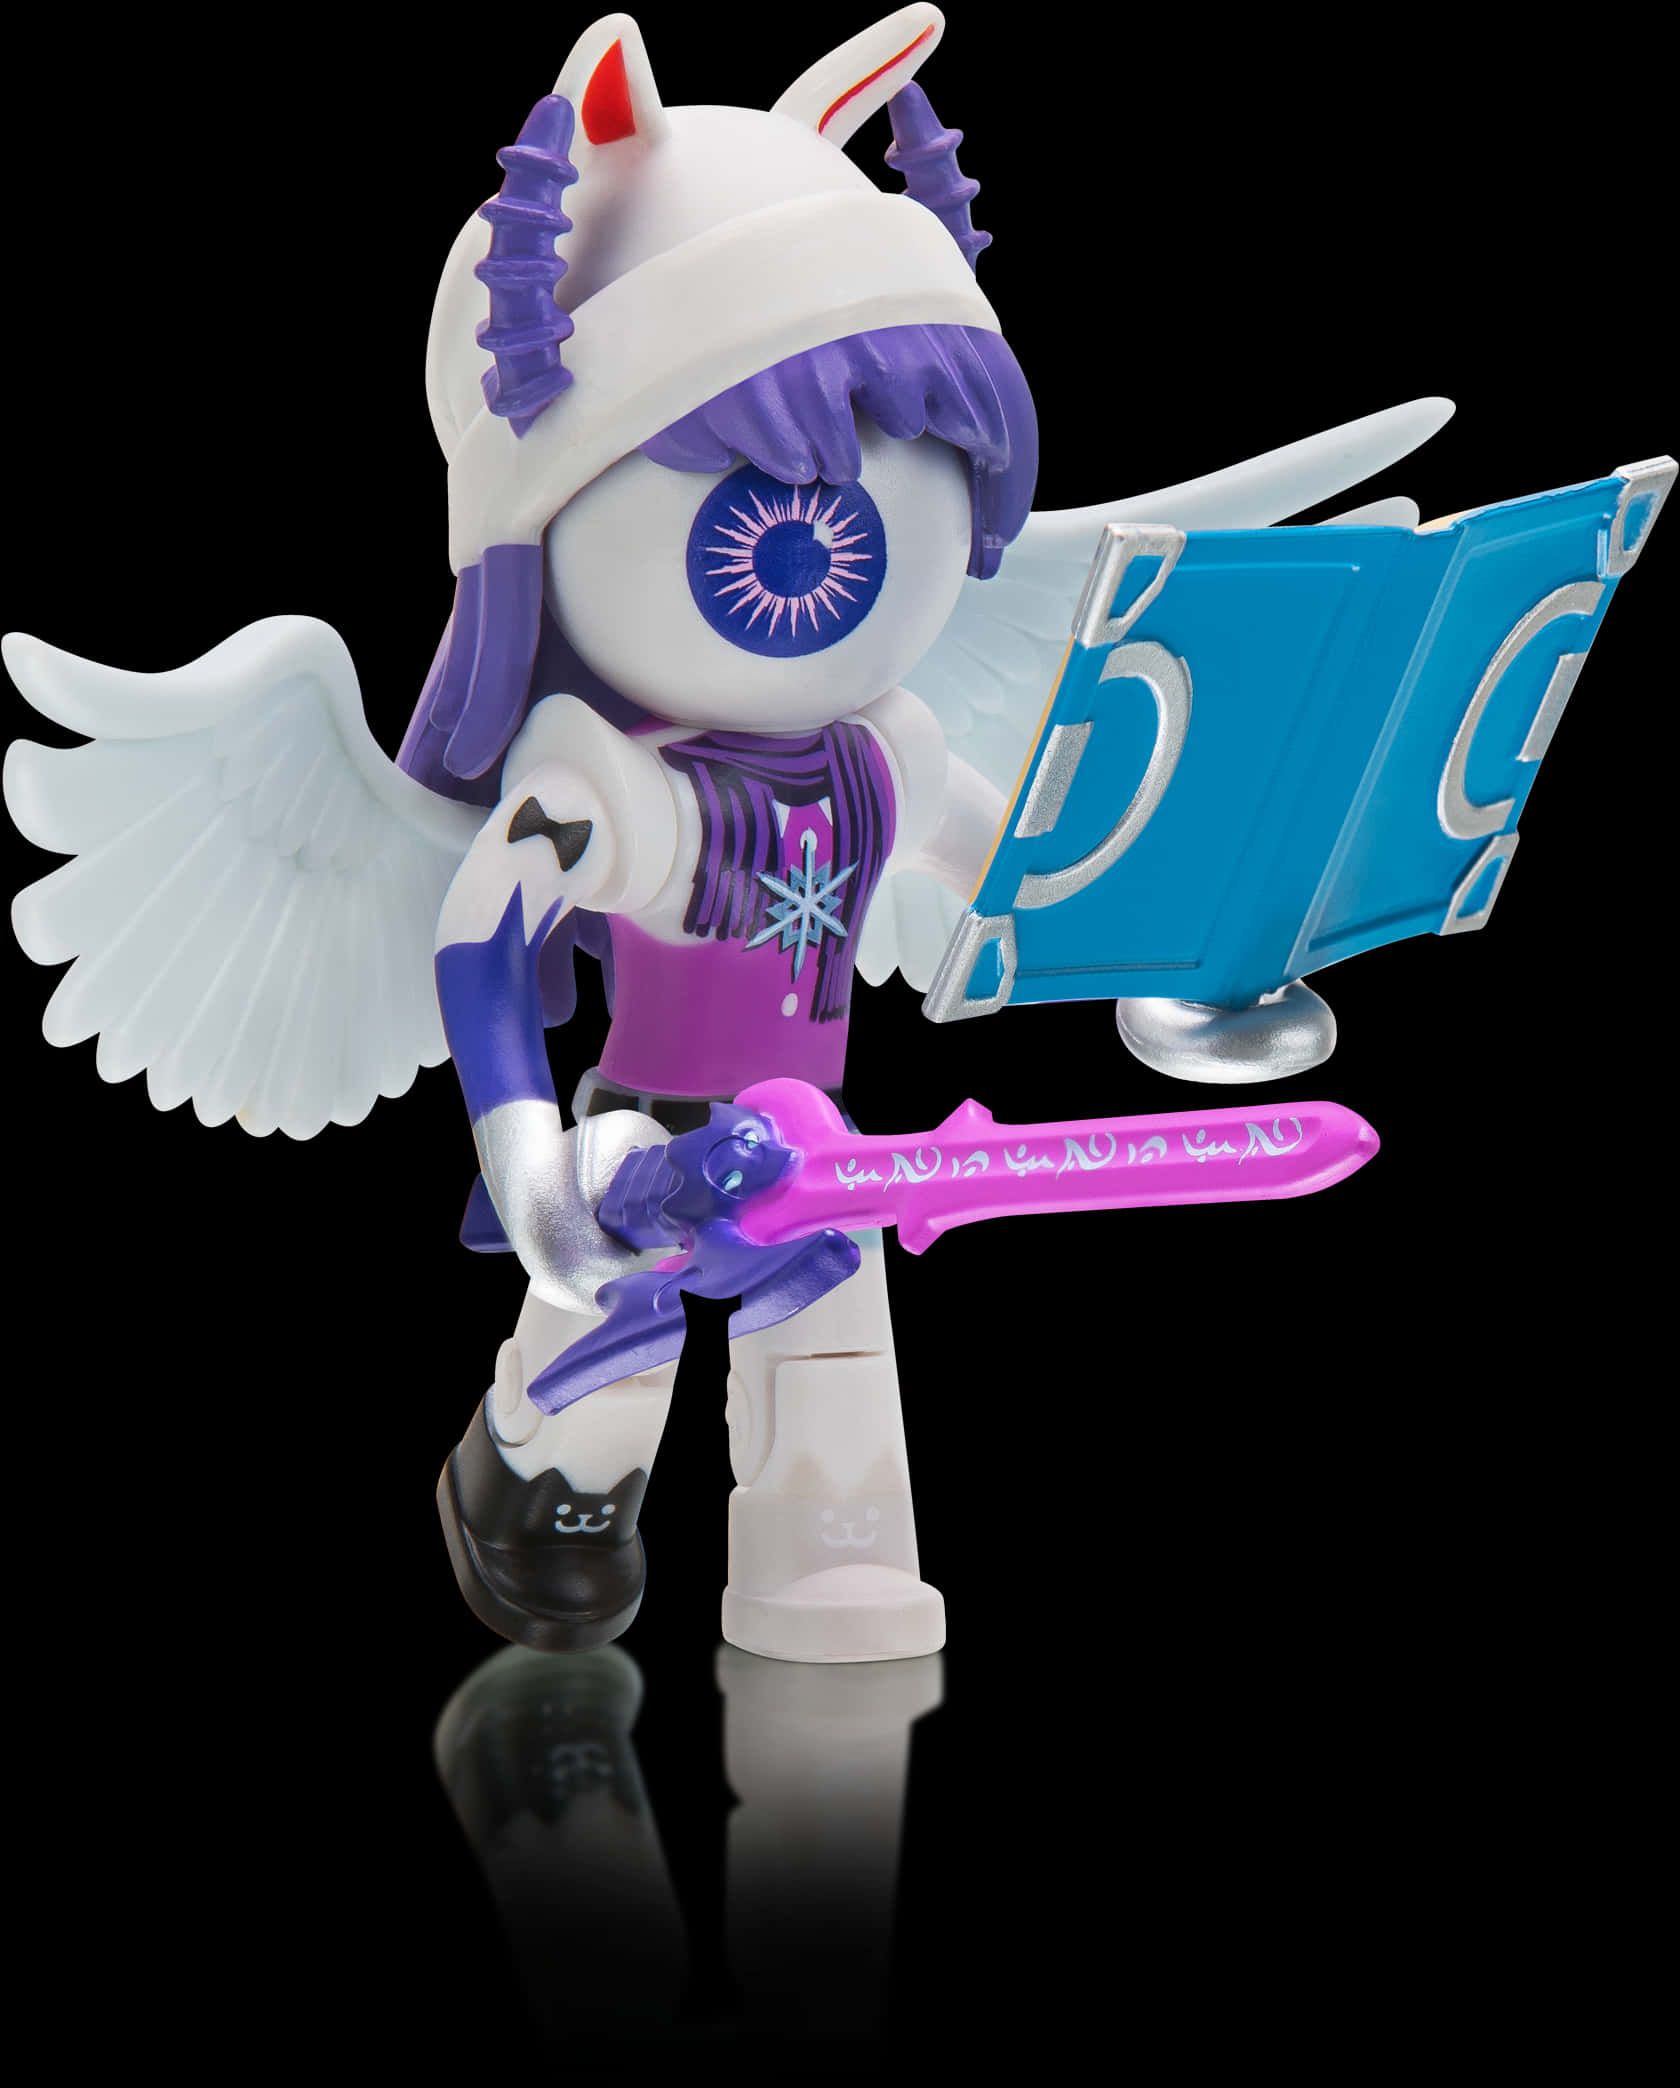 A Toy Figure Holding A Book And Sword